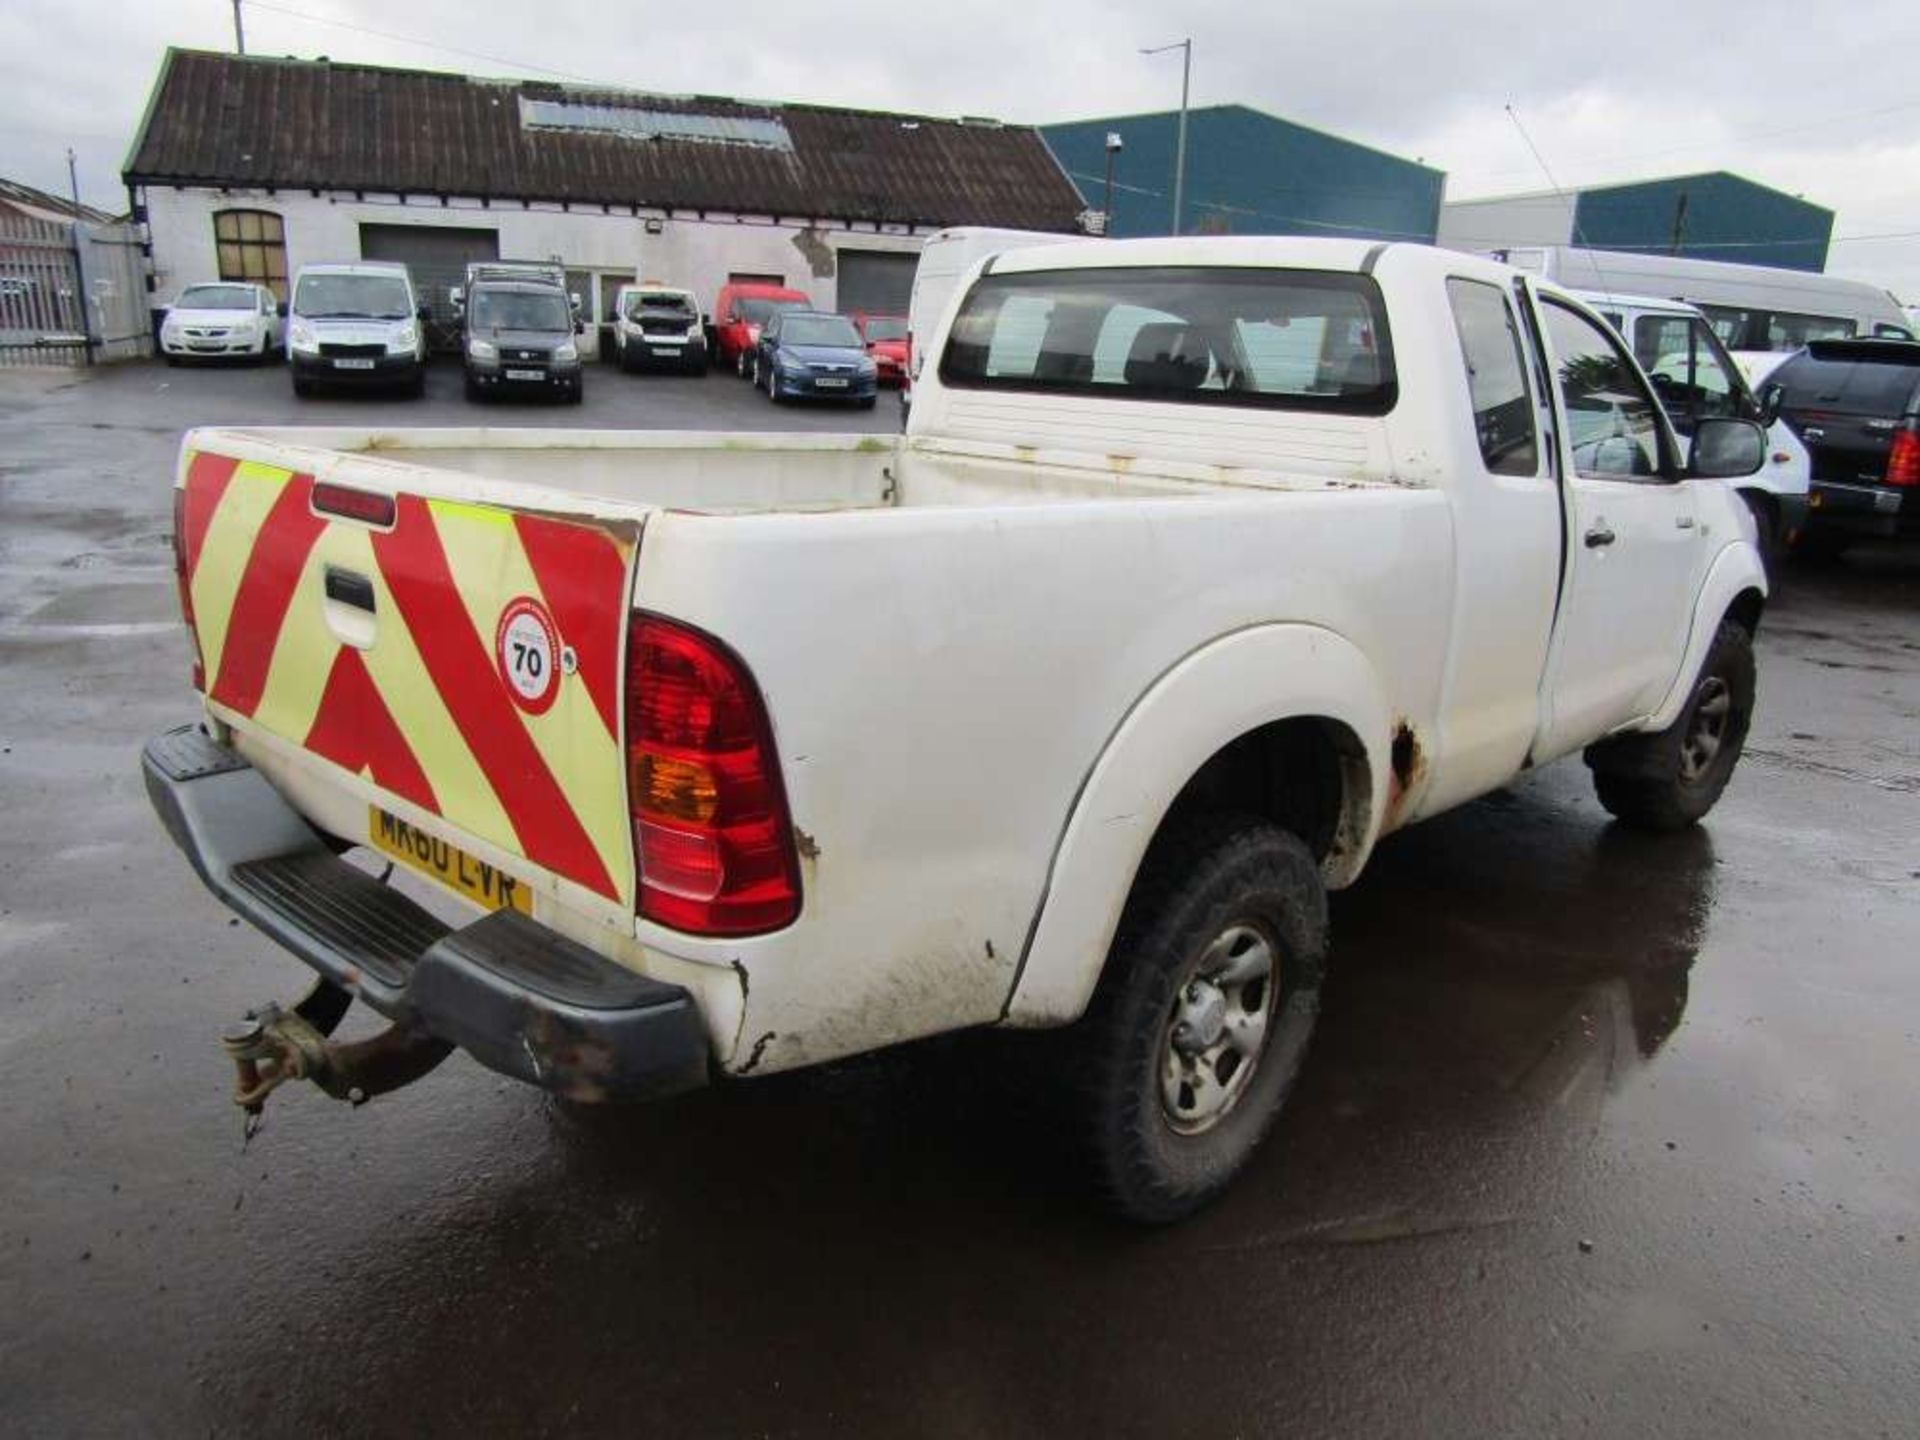 2010 60 reg Toyota Hilux HL2 D-4D 4x4 ECB (Direct United Utilities Water) - Image 4 of 6